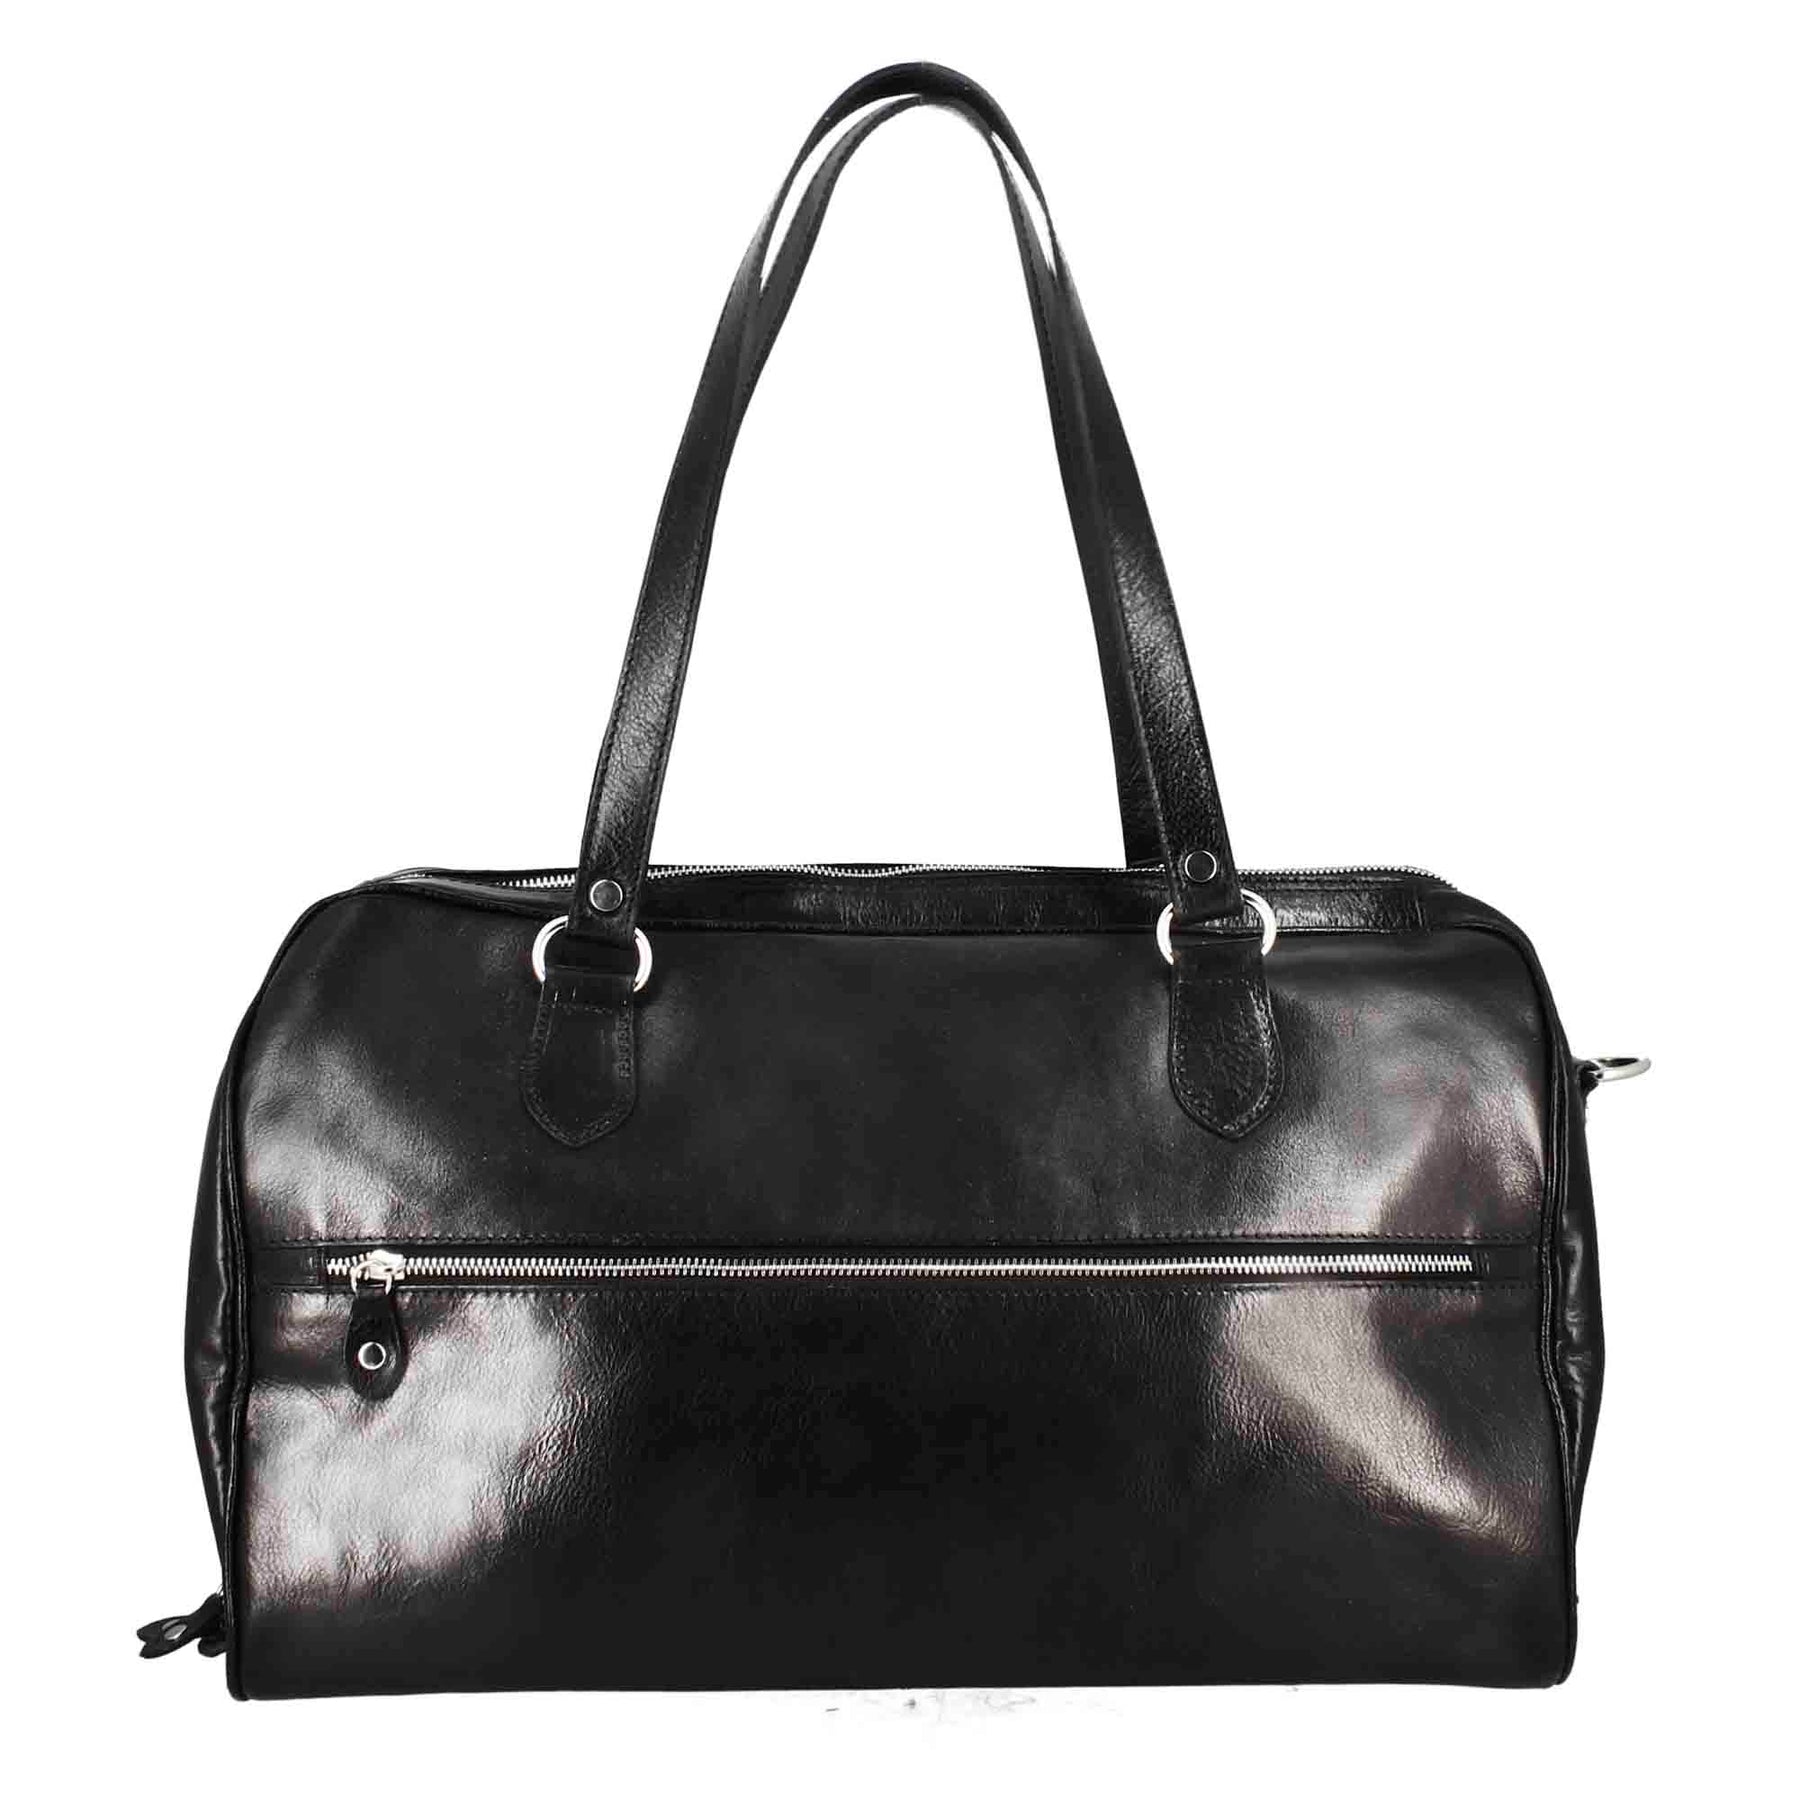 Black leather travel bags with handles and removable shoulder strap